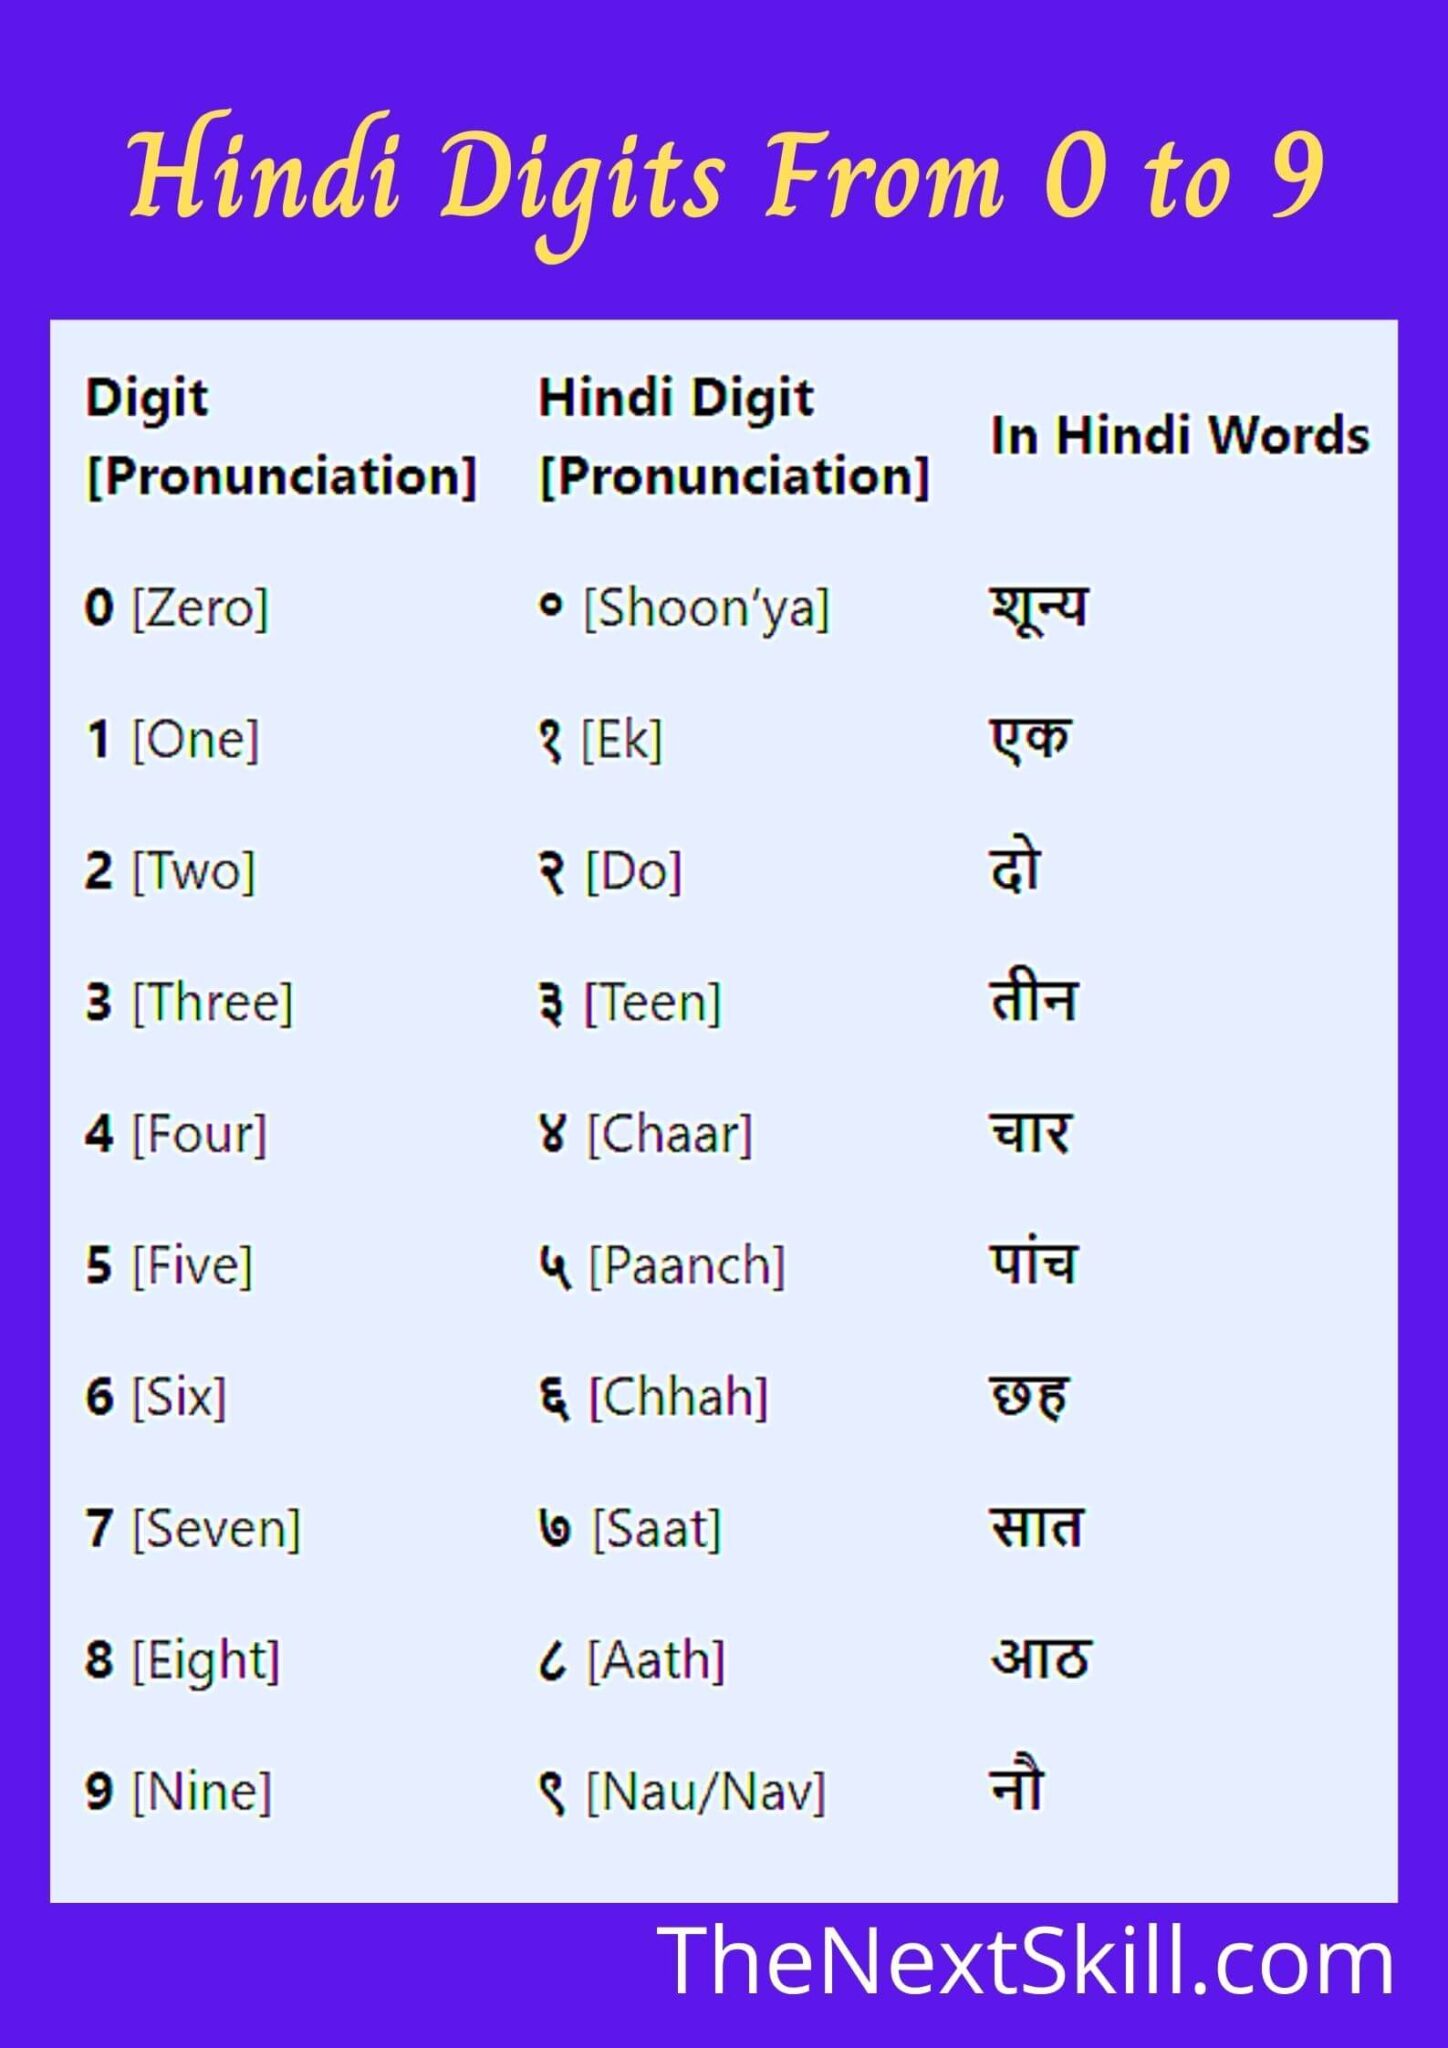 full-guide-to-hindi-number-counting-1-to-100-in-words-in-the-hindi